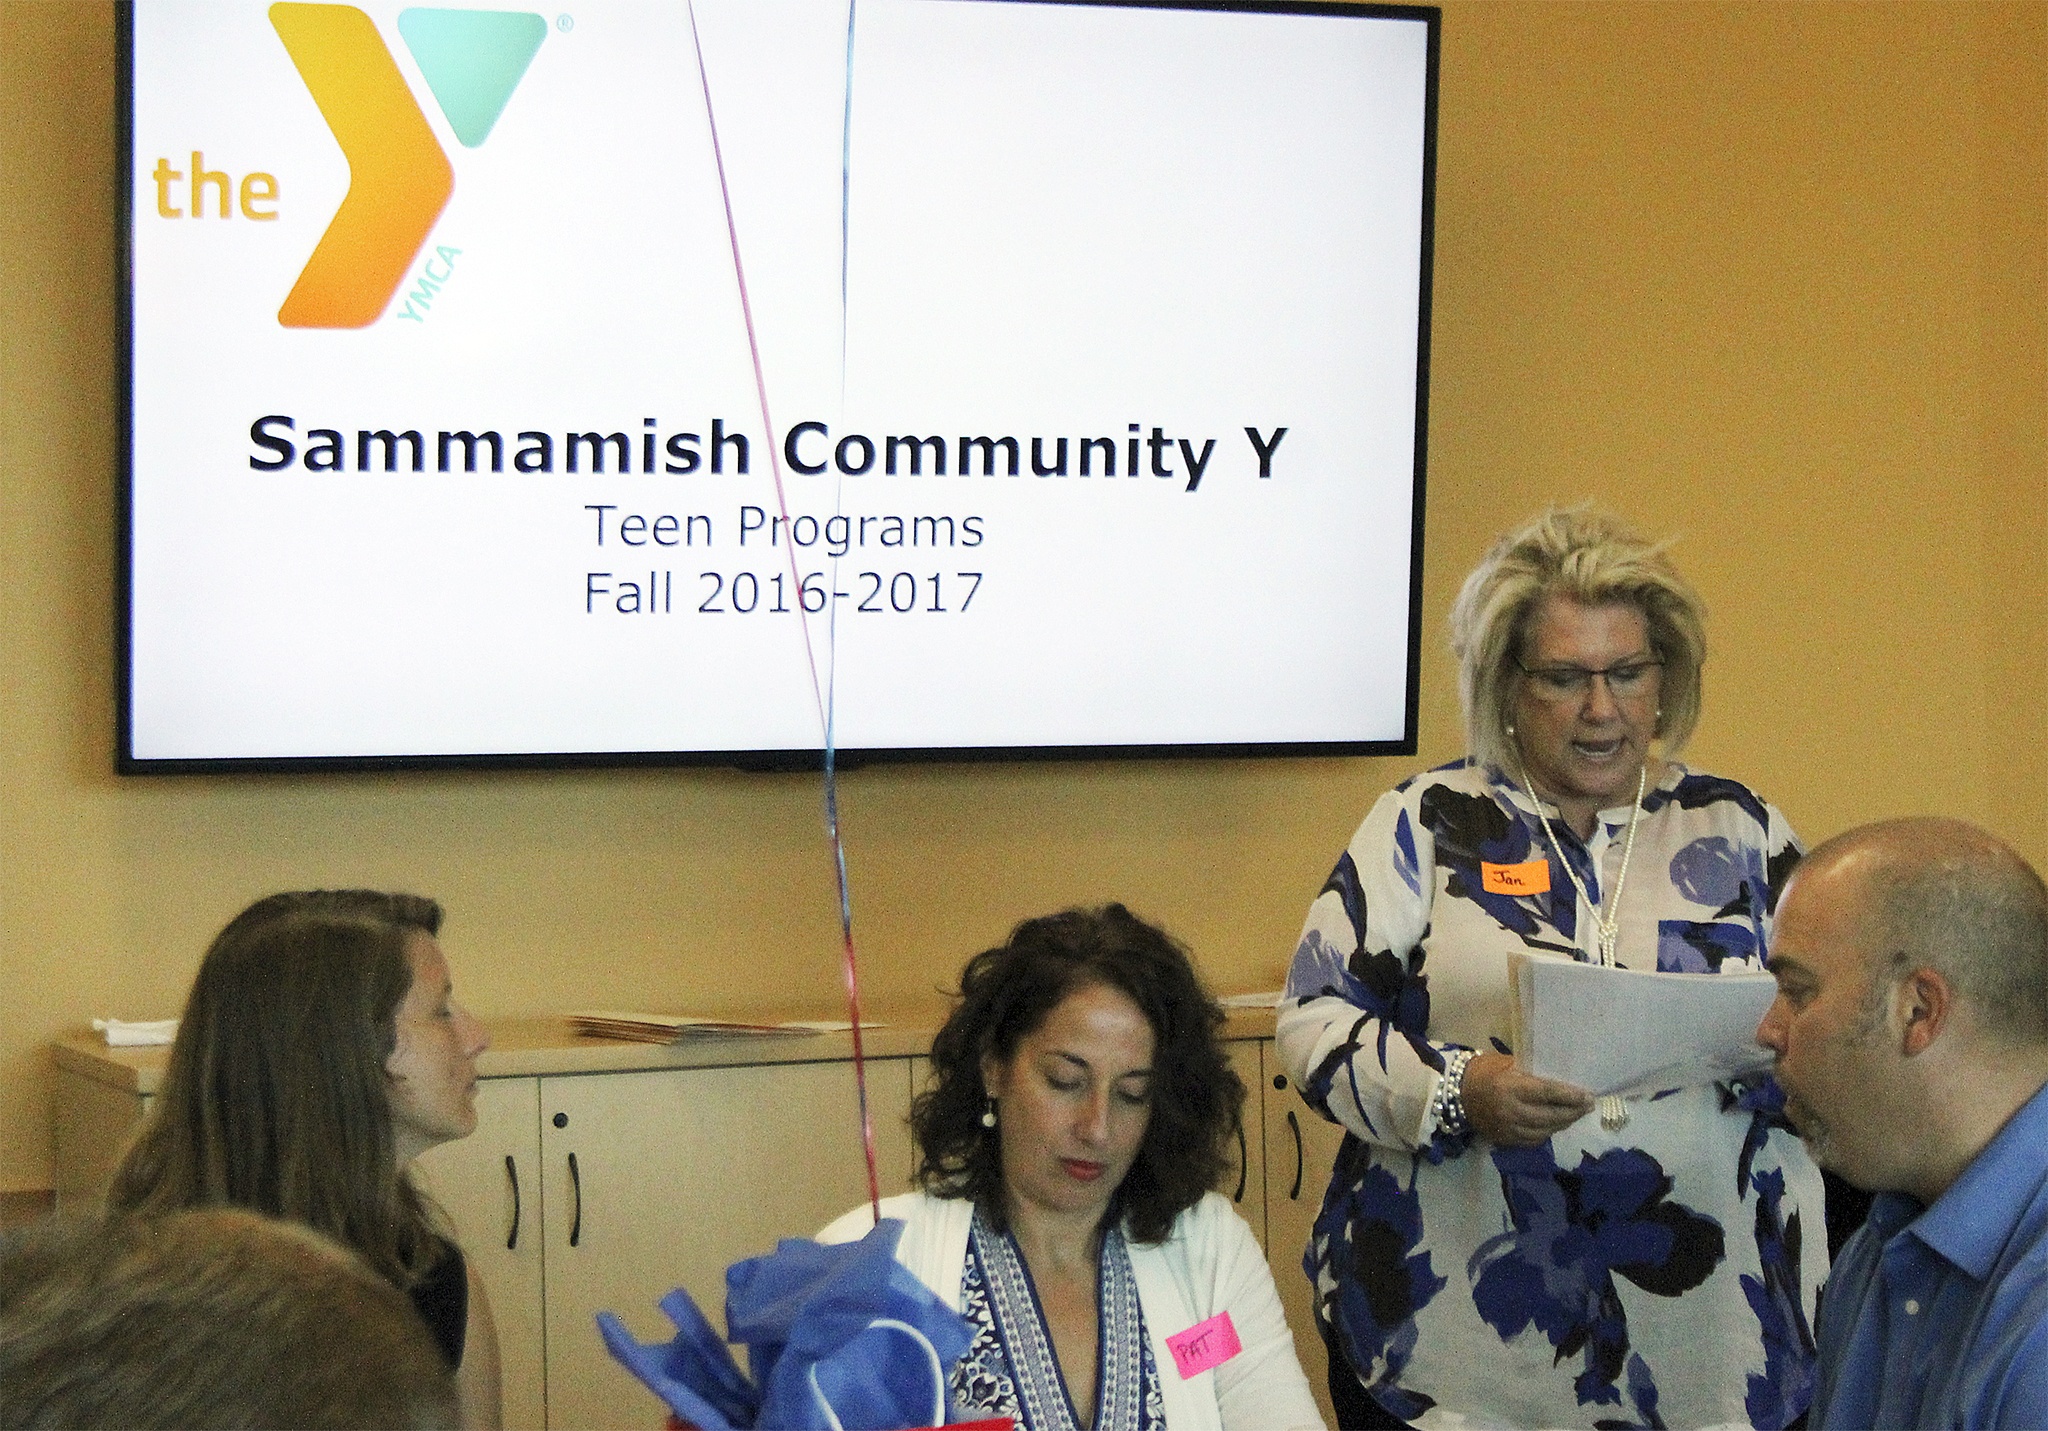 Sammamish Community YMCA board member Jan Matthews leads a discussion about the Y’s youth programs Tuesday (Joe Livarchik/staff photo).